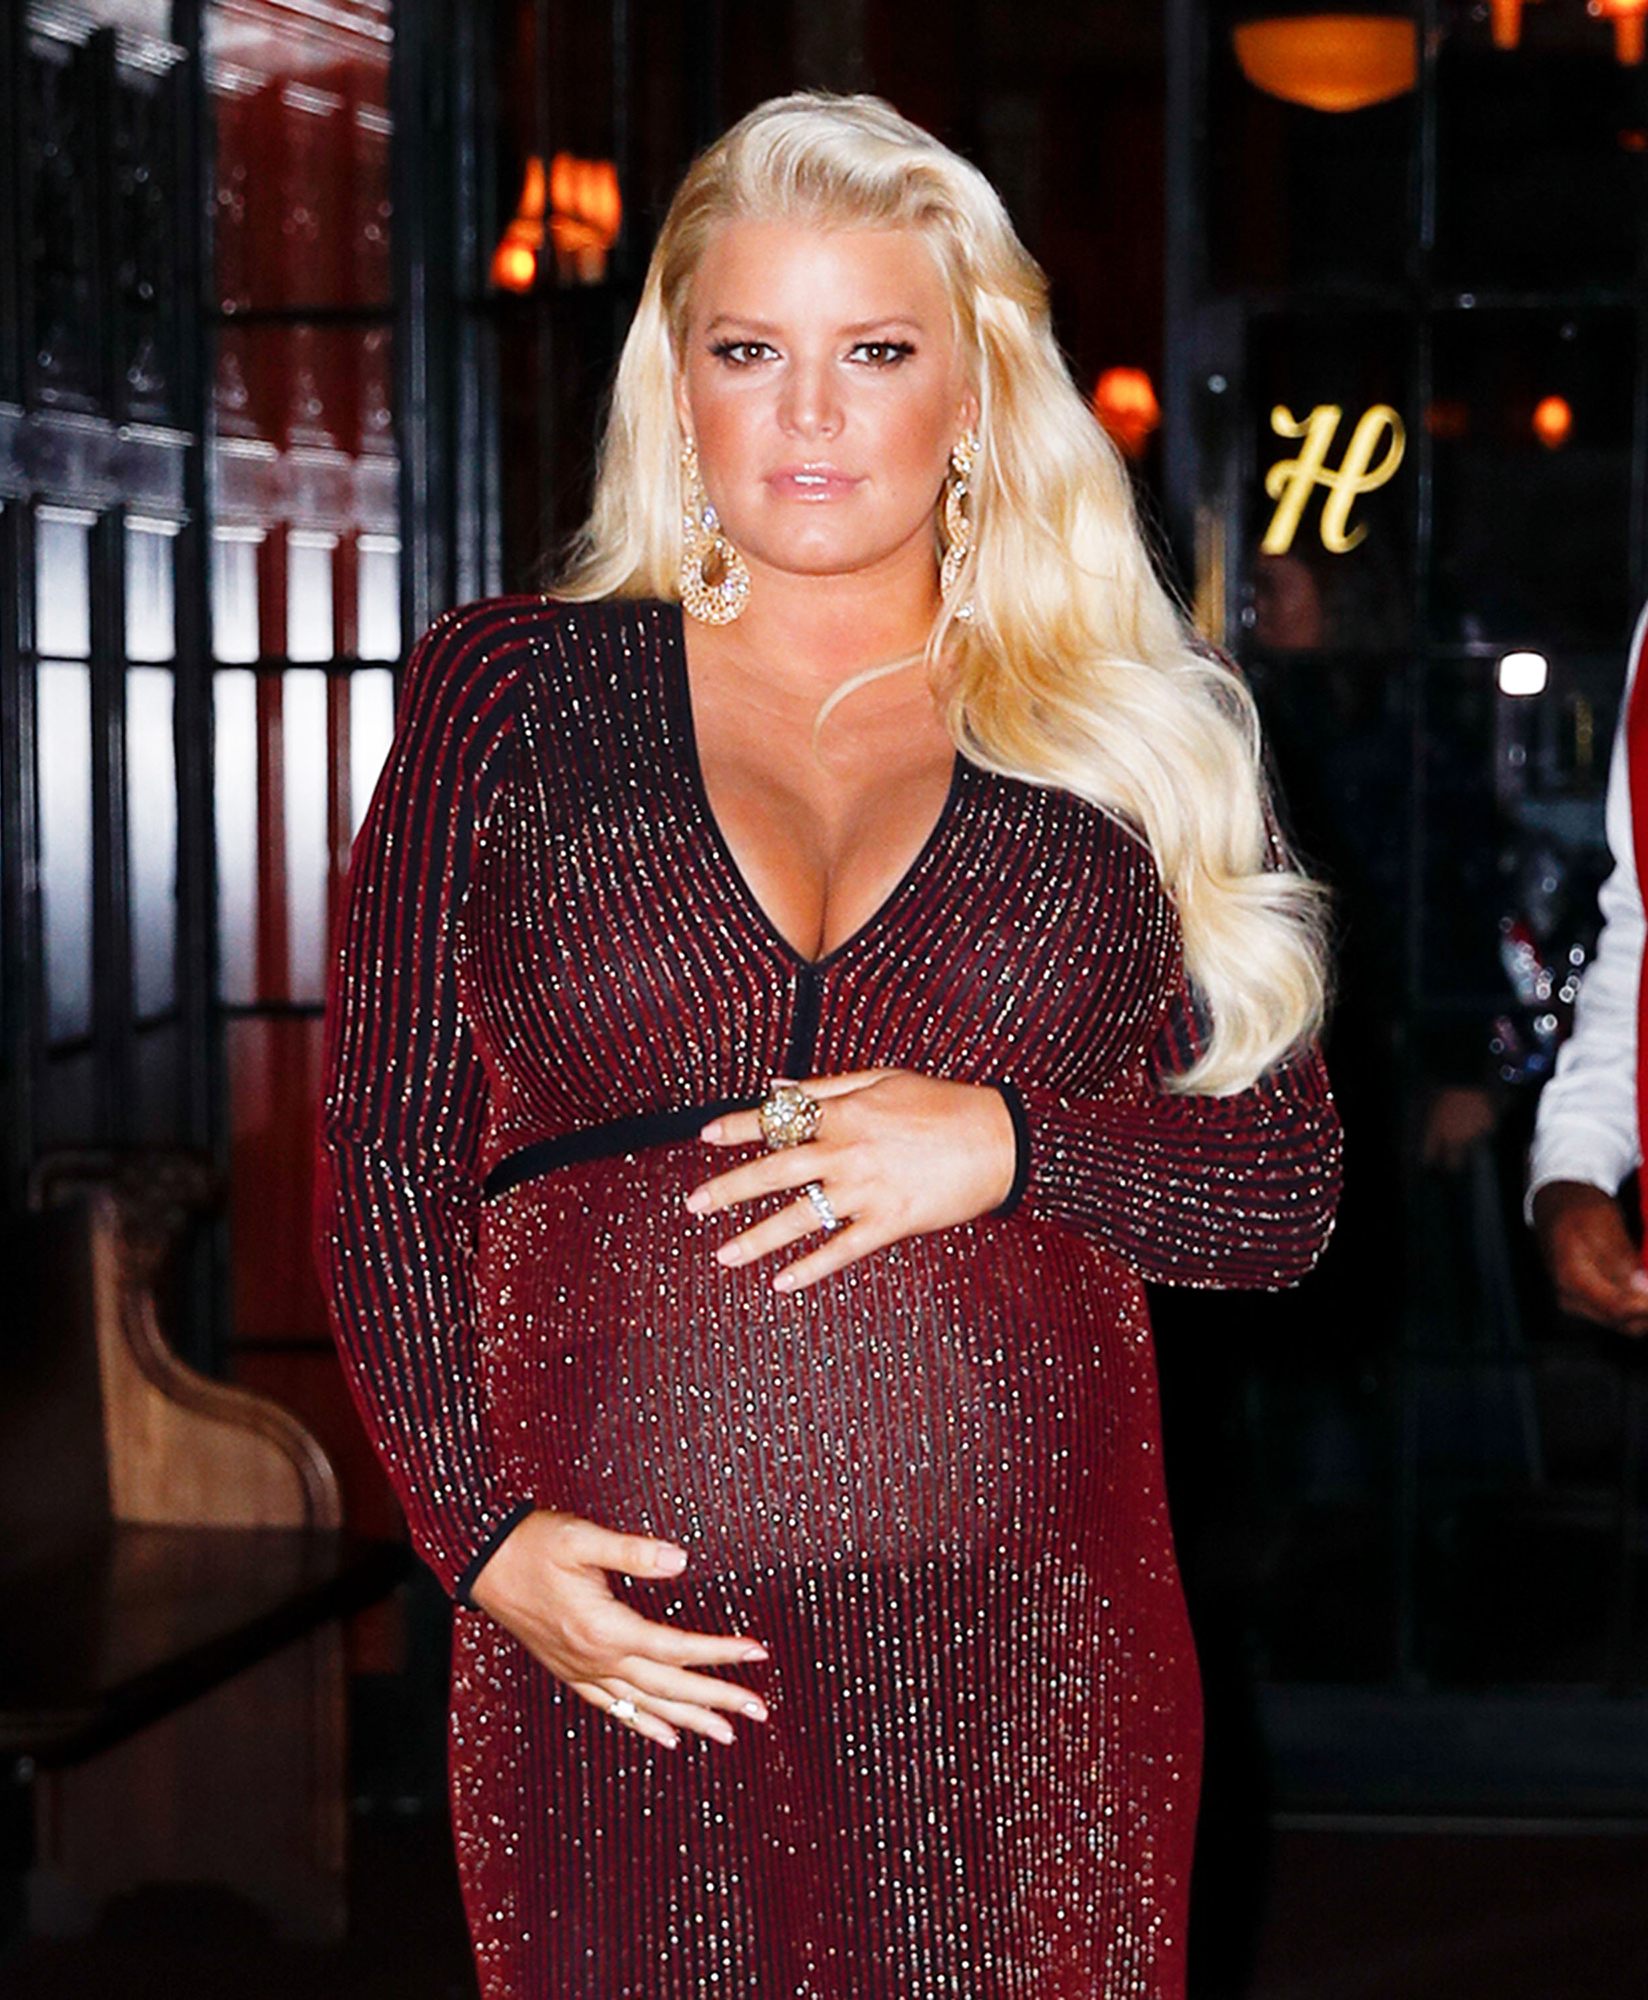 https://www.usmagazine.com/wp-content/uploads/2019/03/Everything-Jessica-Simpson-Has-Said-About-Her-Pregnancies-Promo.jpg?quality=40&strip=all